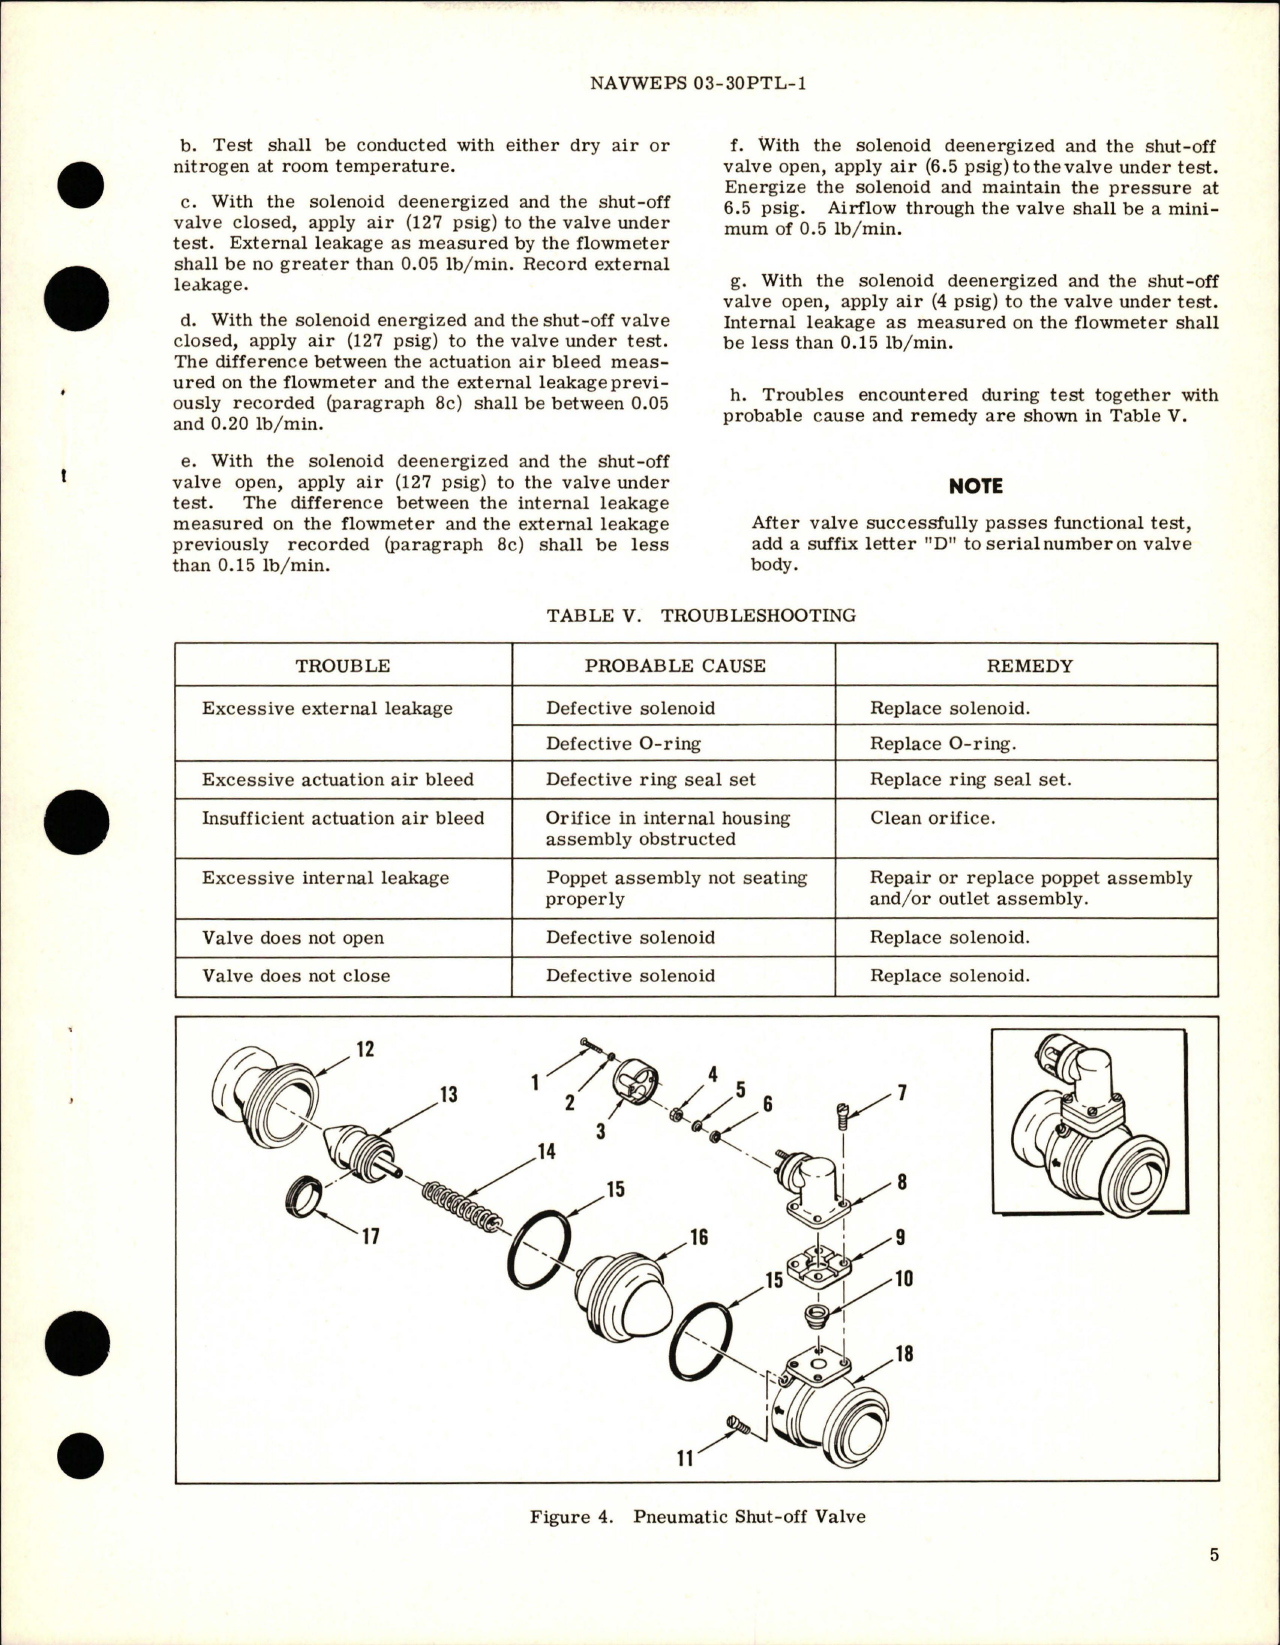 Sample page 5 from AirCorps Library document: Overhaul Instructions with Parts Breakdown for Pneumatic Shut-Off Valve - Part 21011